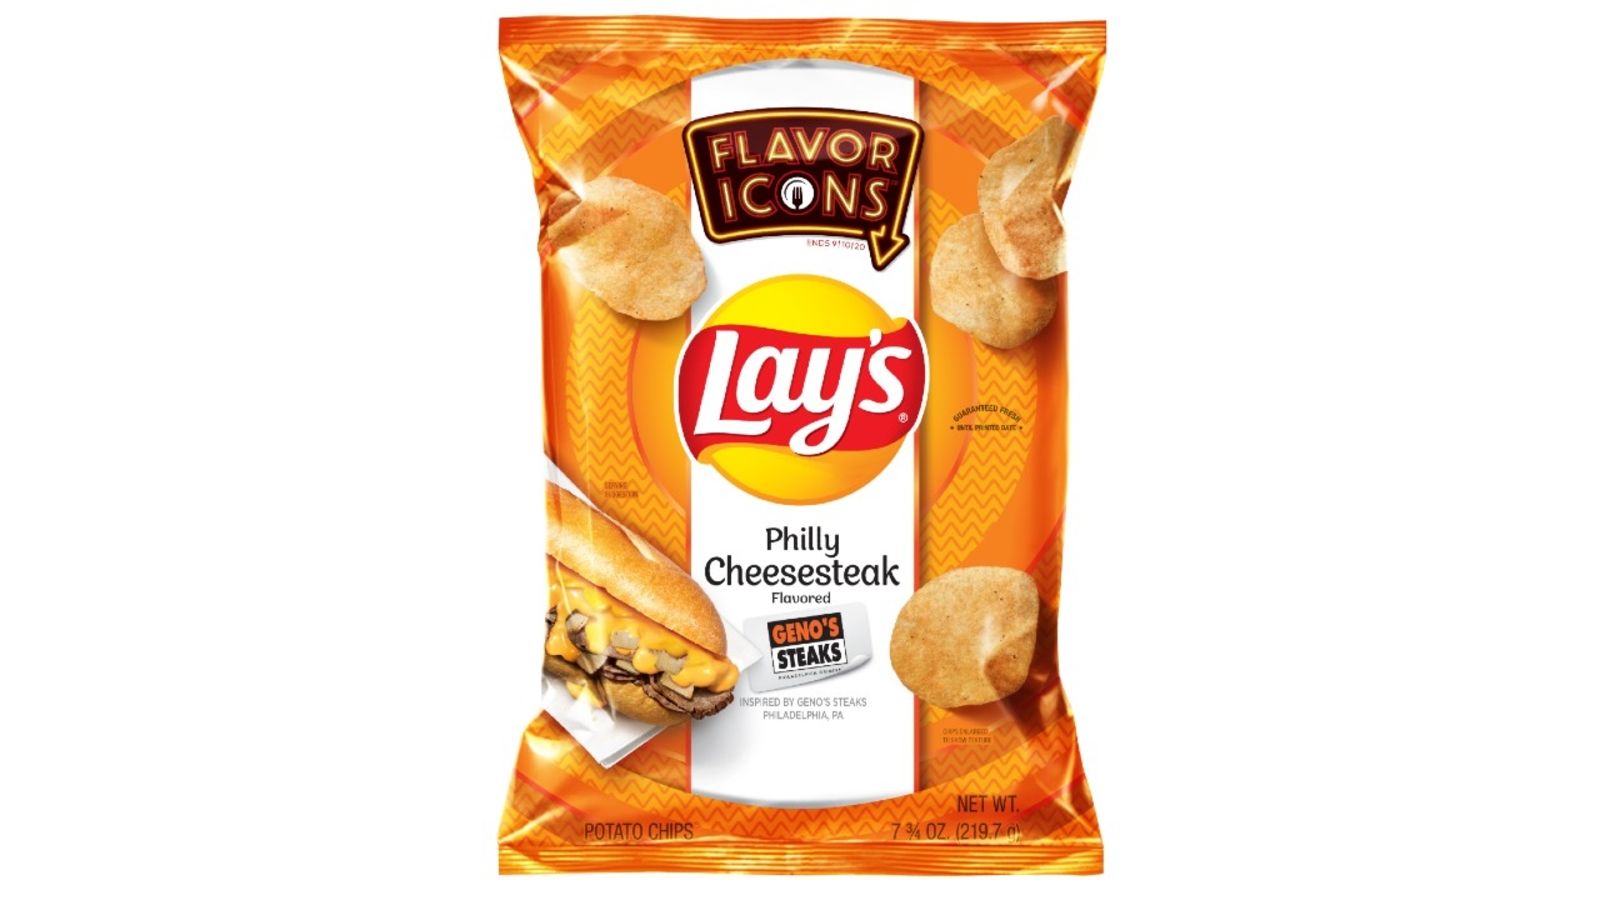 Lay's To Release New Philadelphia Cheesesteak Flavored Chip Inspired By Geno's Steaks